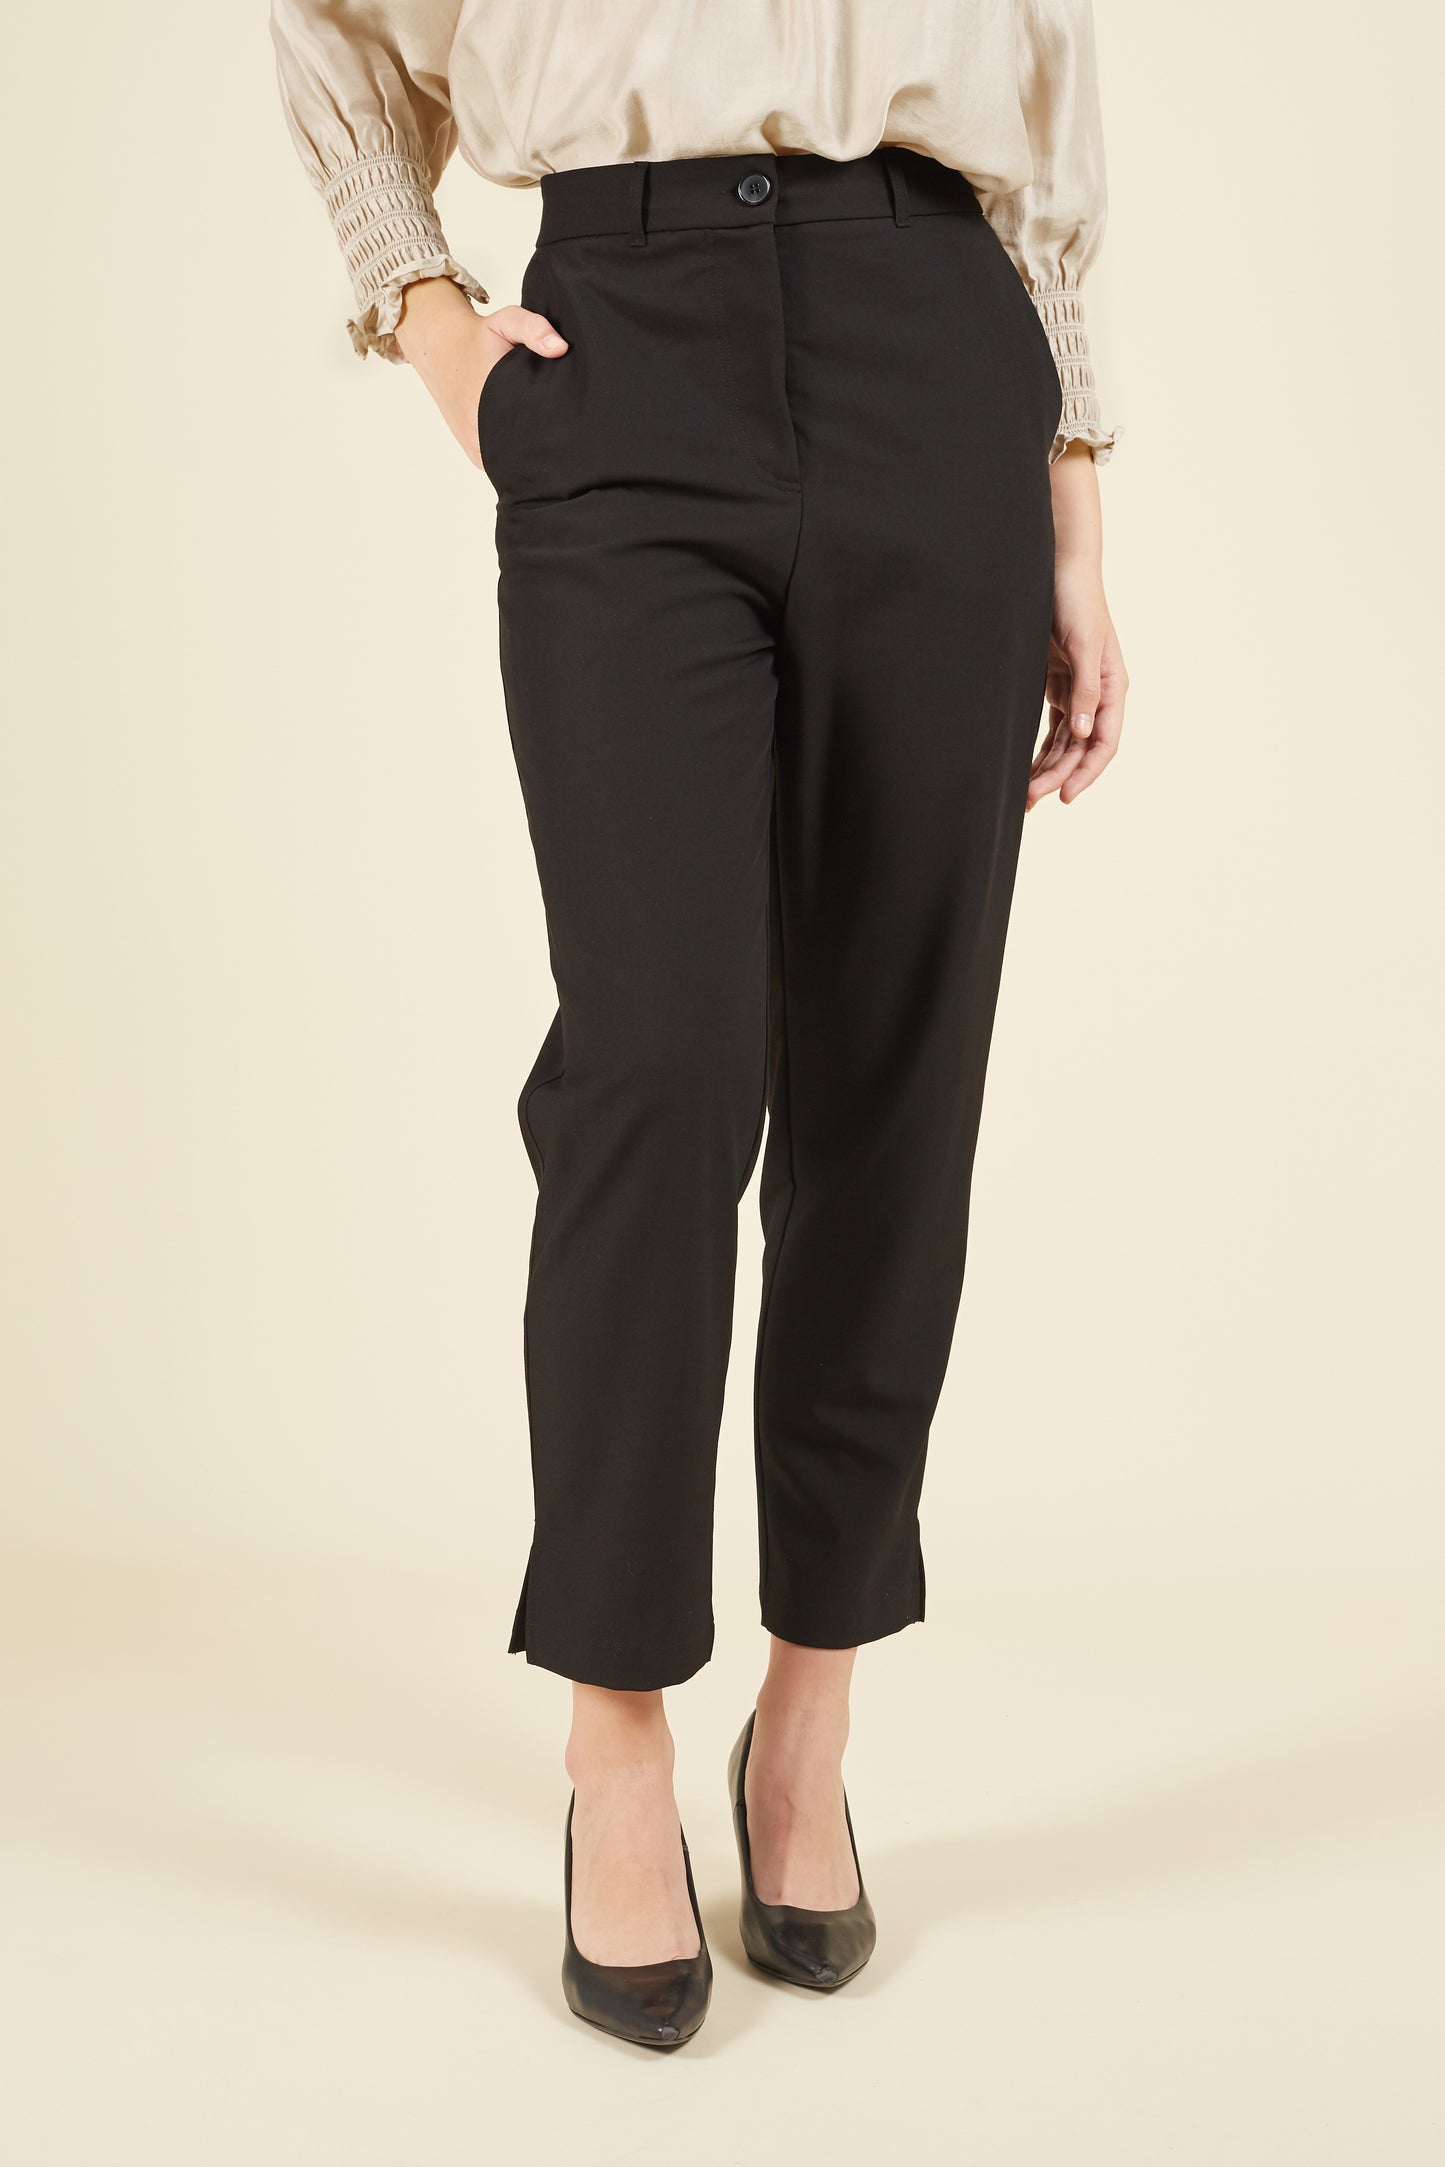 Artemis High Waisted Trousers